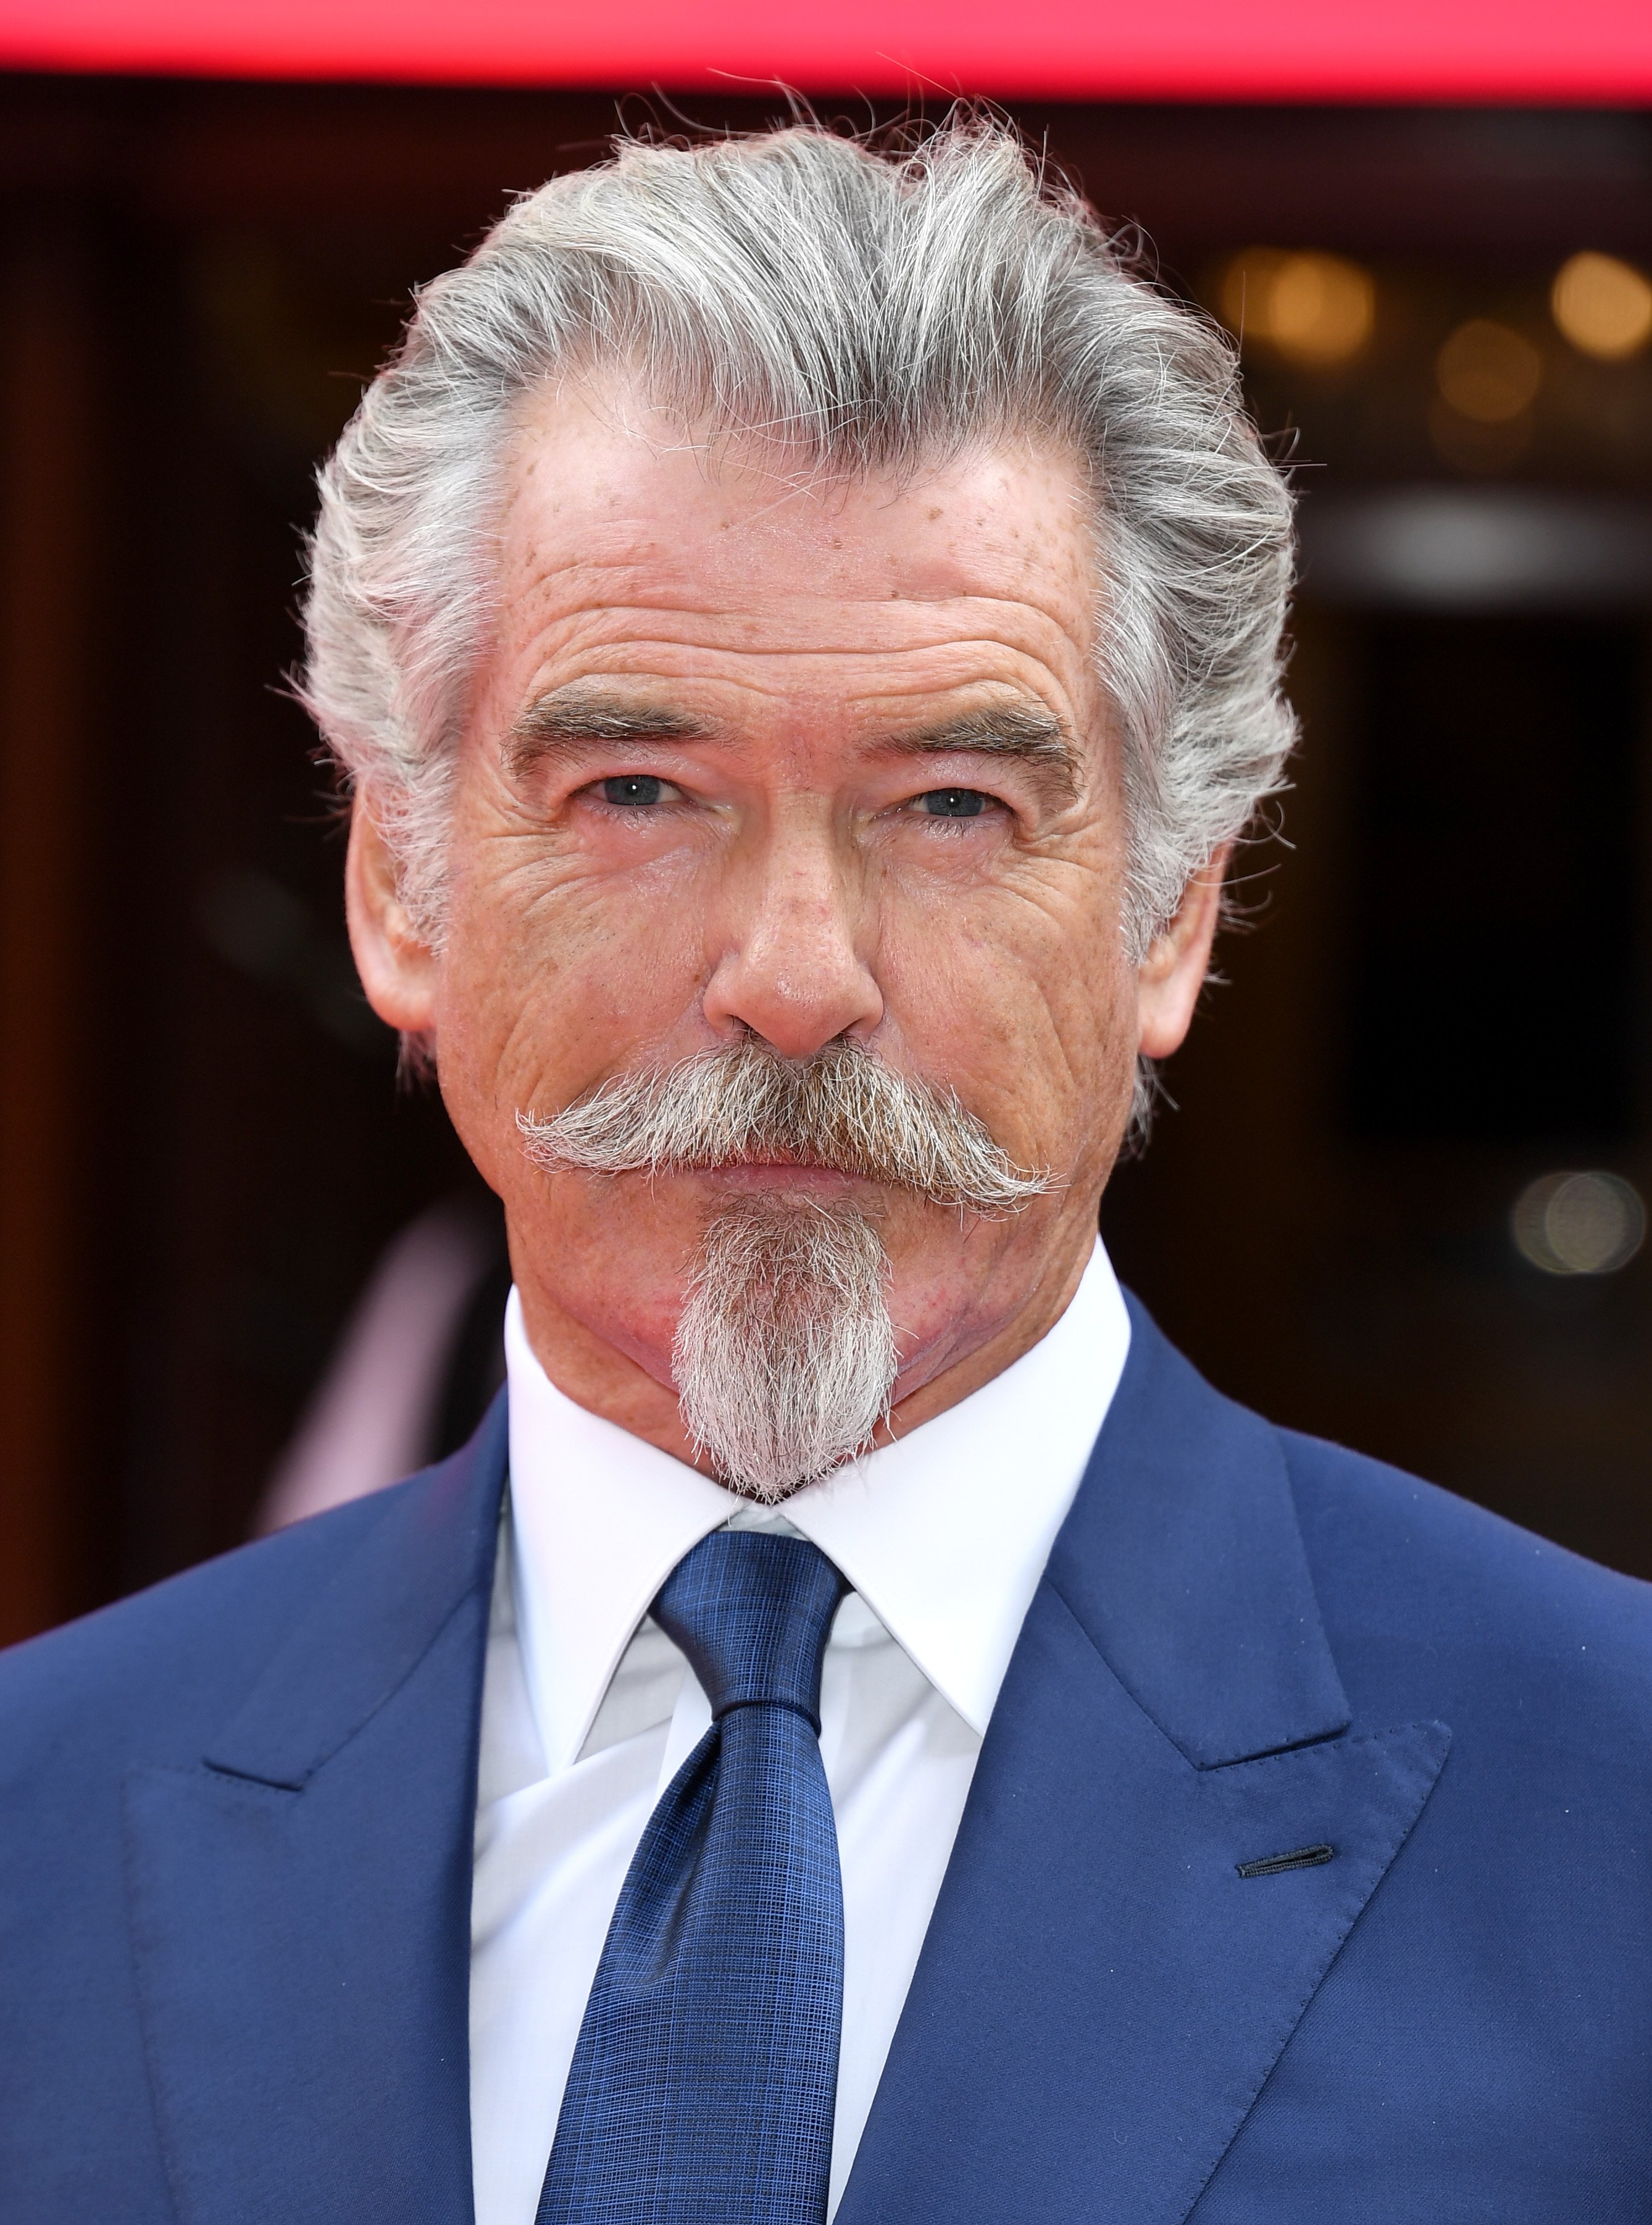 Pierce Brosnan attends the Prince's Trust And TK Maxx & Homesense Awards at London Palladium on March 11, 2020, in London, England | Source: Getty Images 